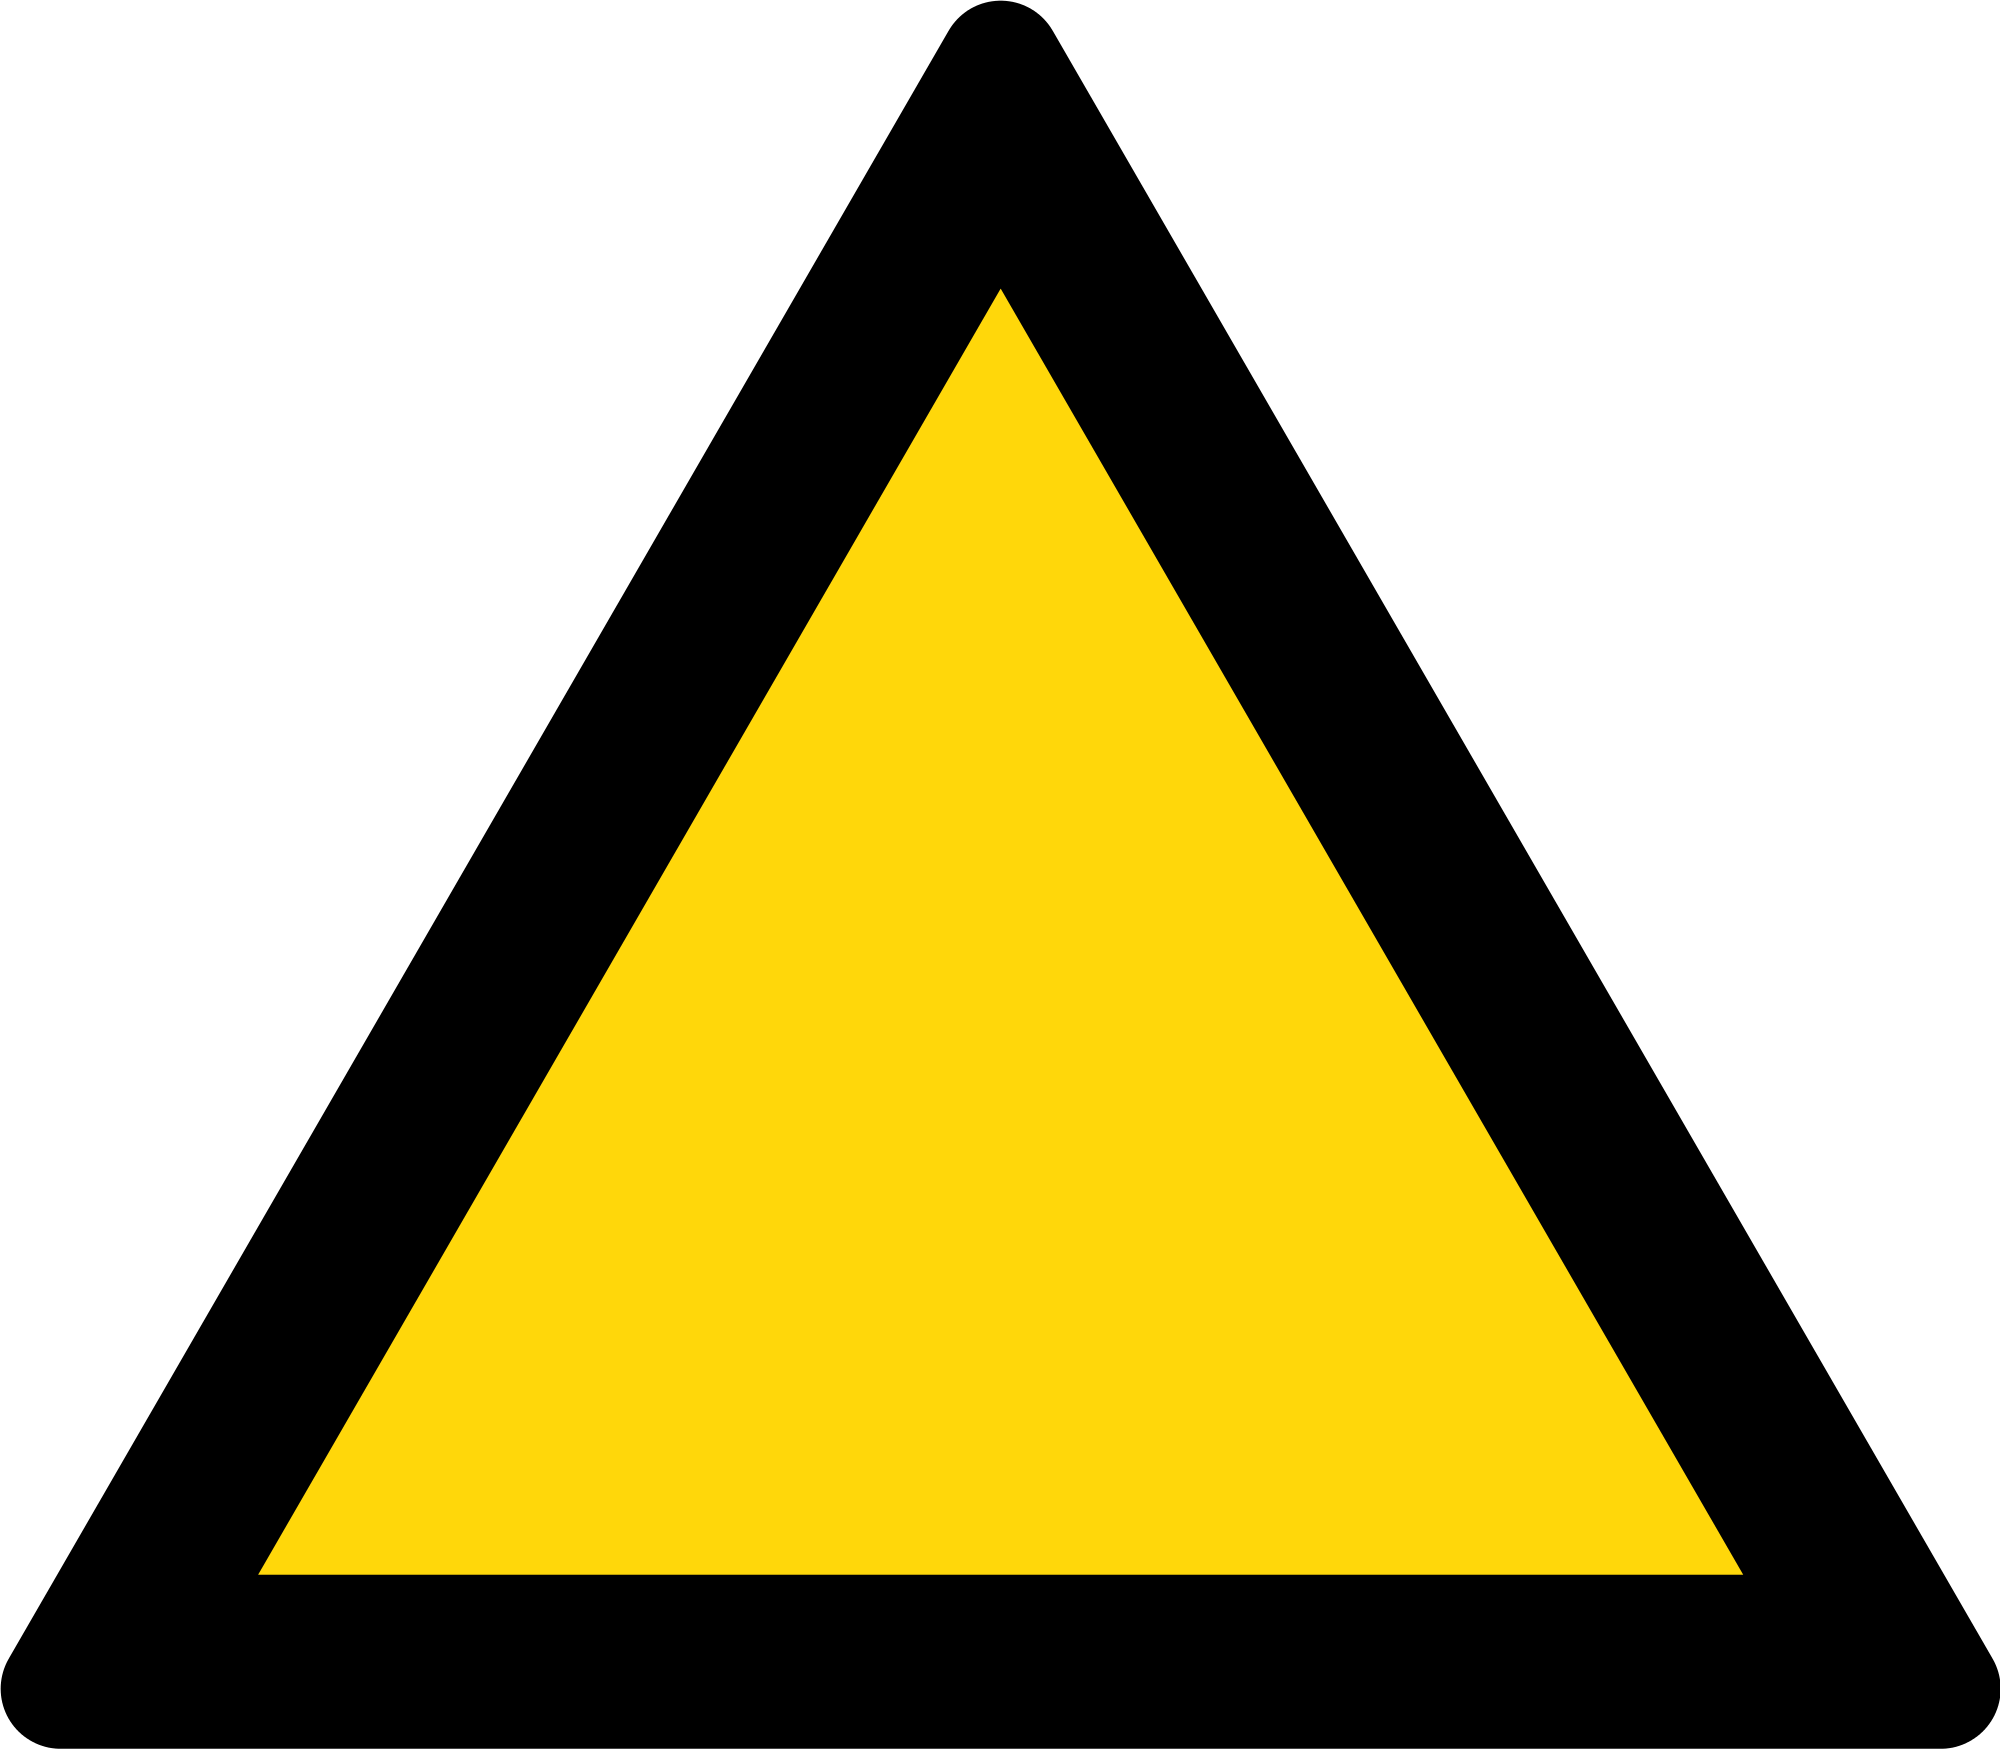 Blue and Yellow Triangle Logo - File:Triangle warning sign (black and yellow).svg - Wikimedia Commons